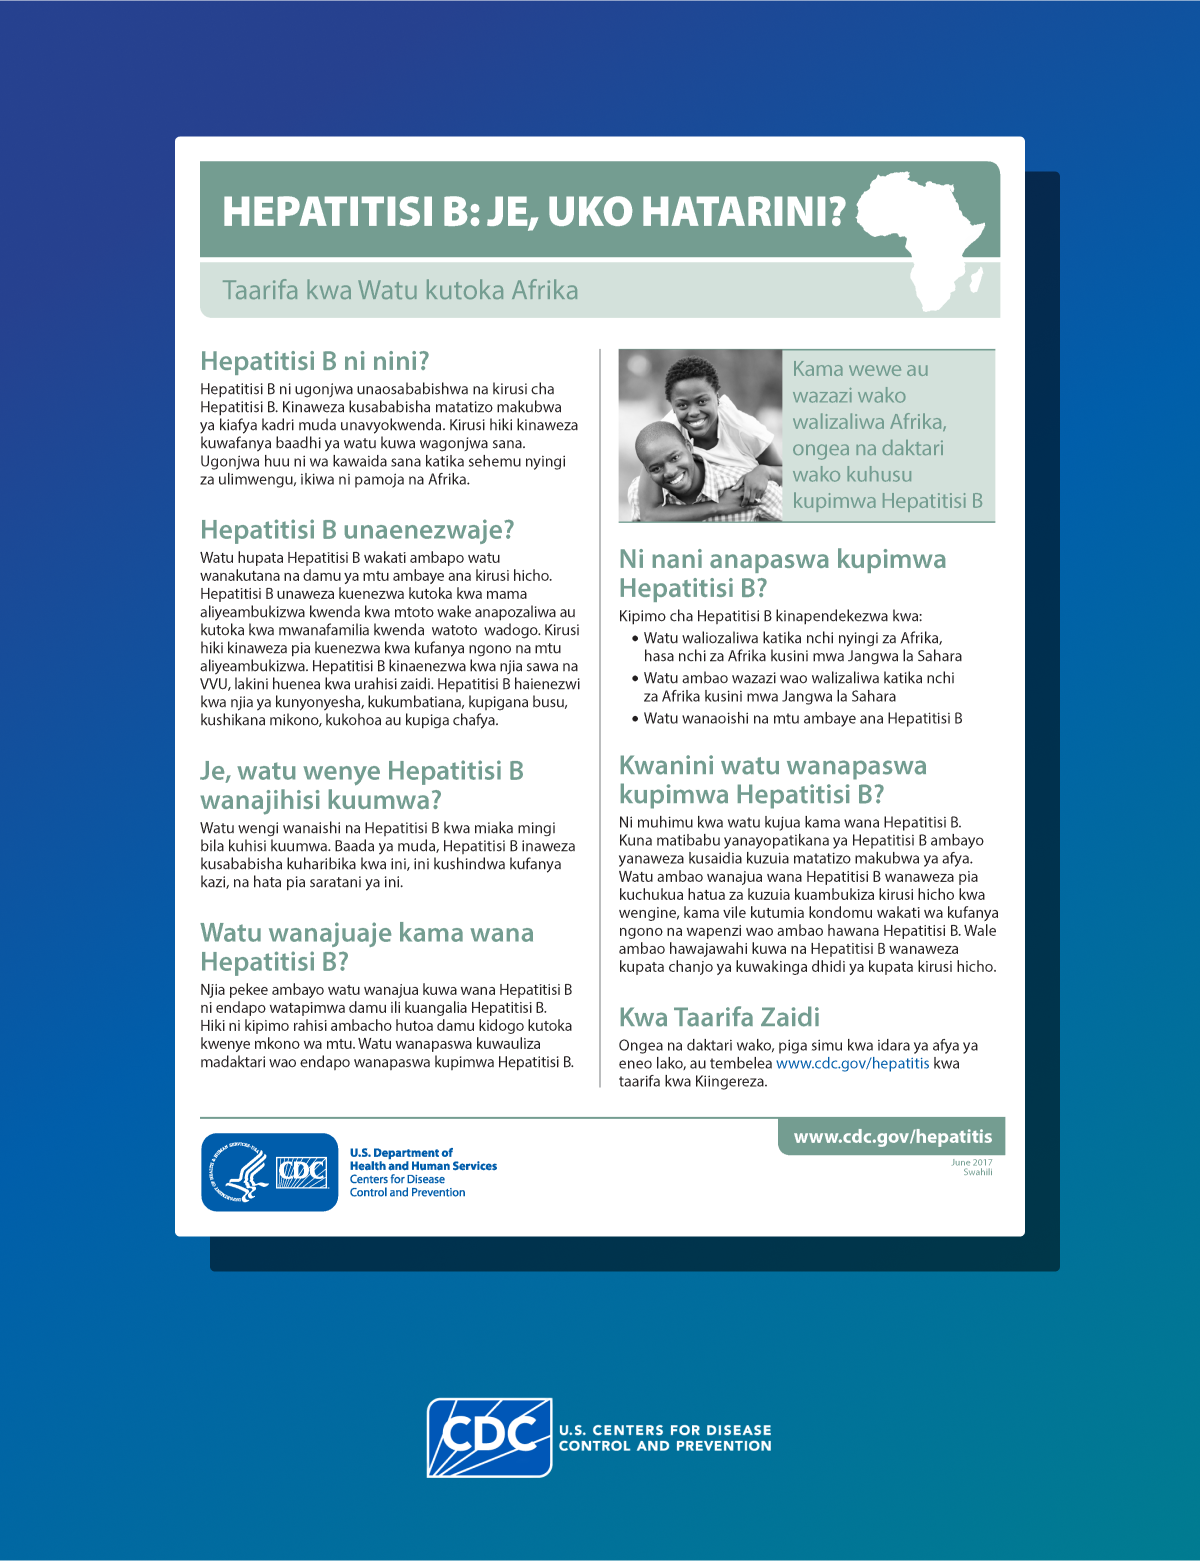 Poster in Swahili discussing risk factors for hepatitis B